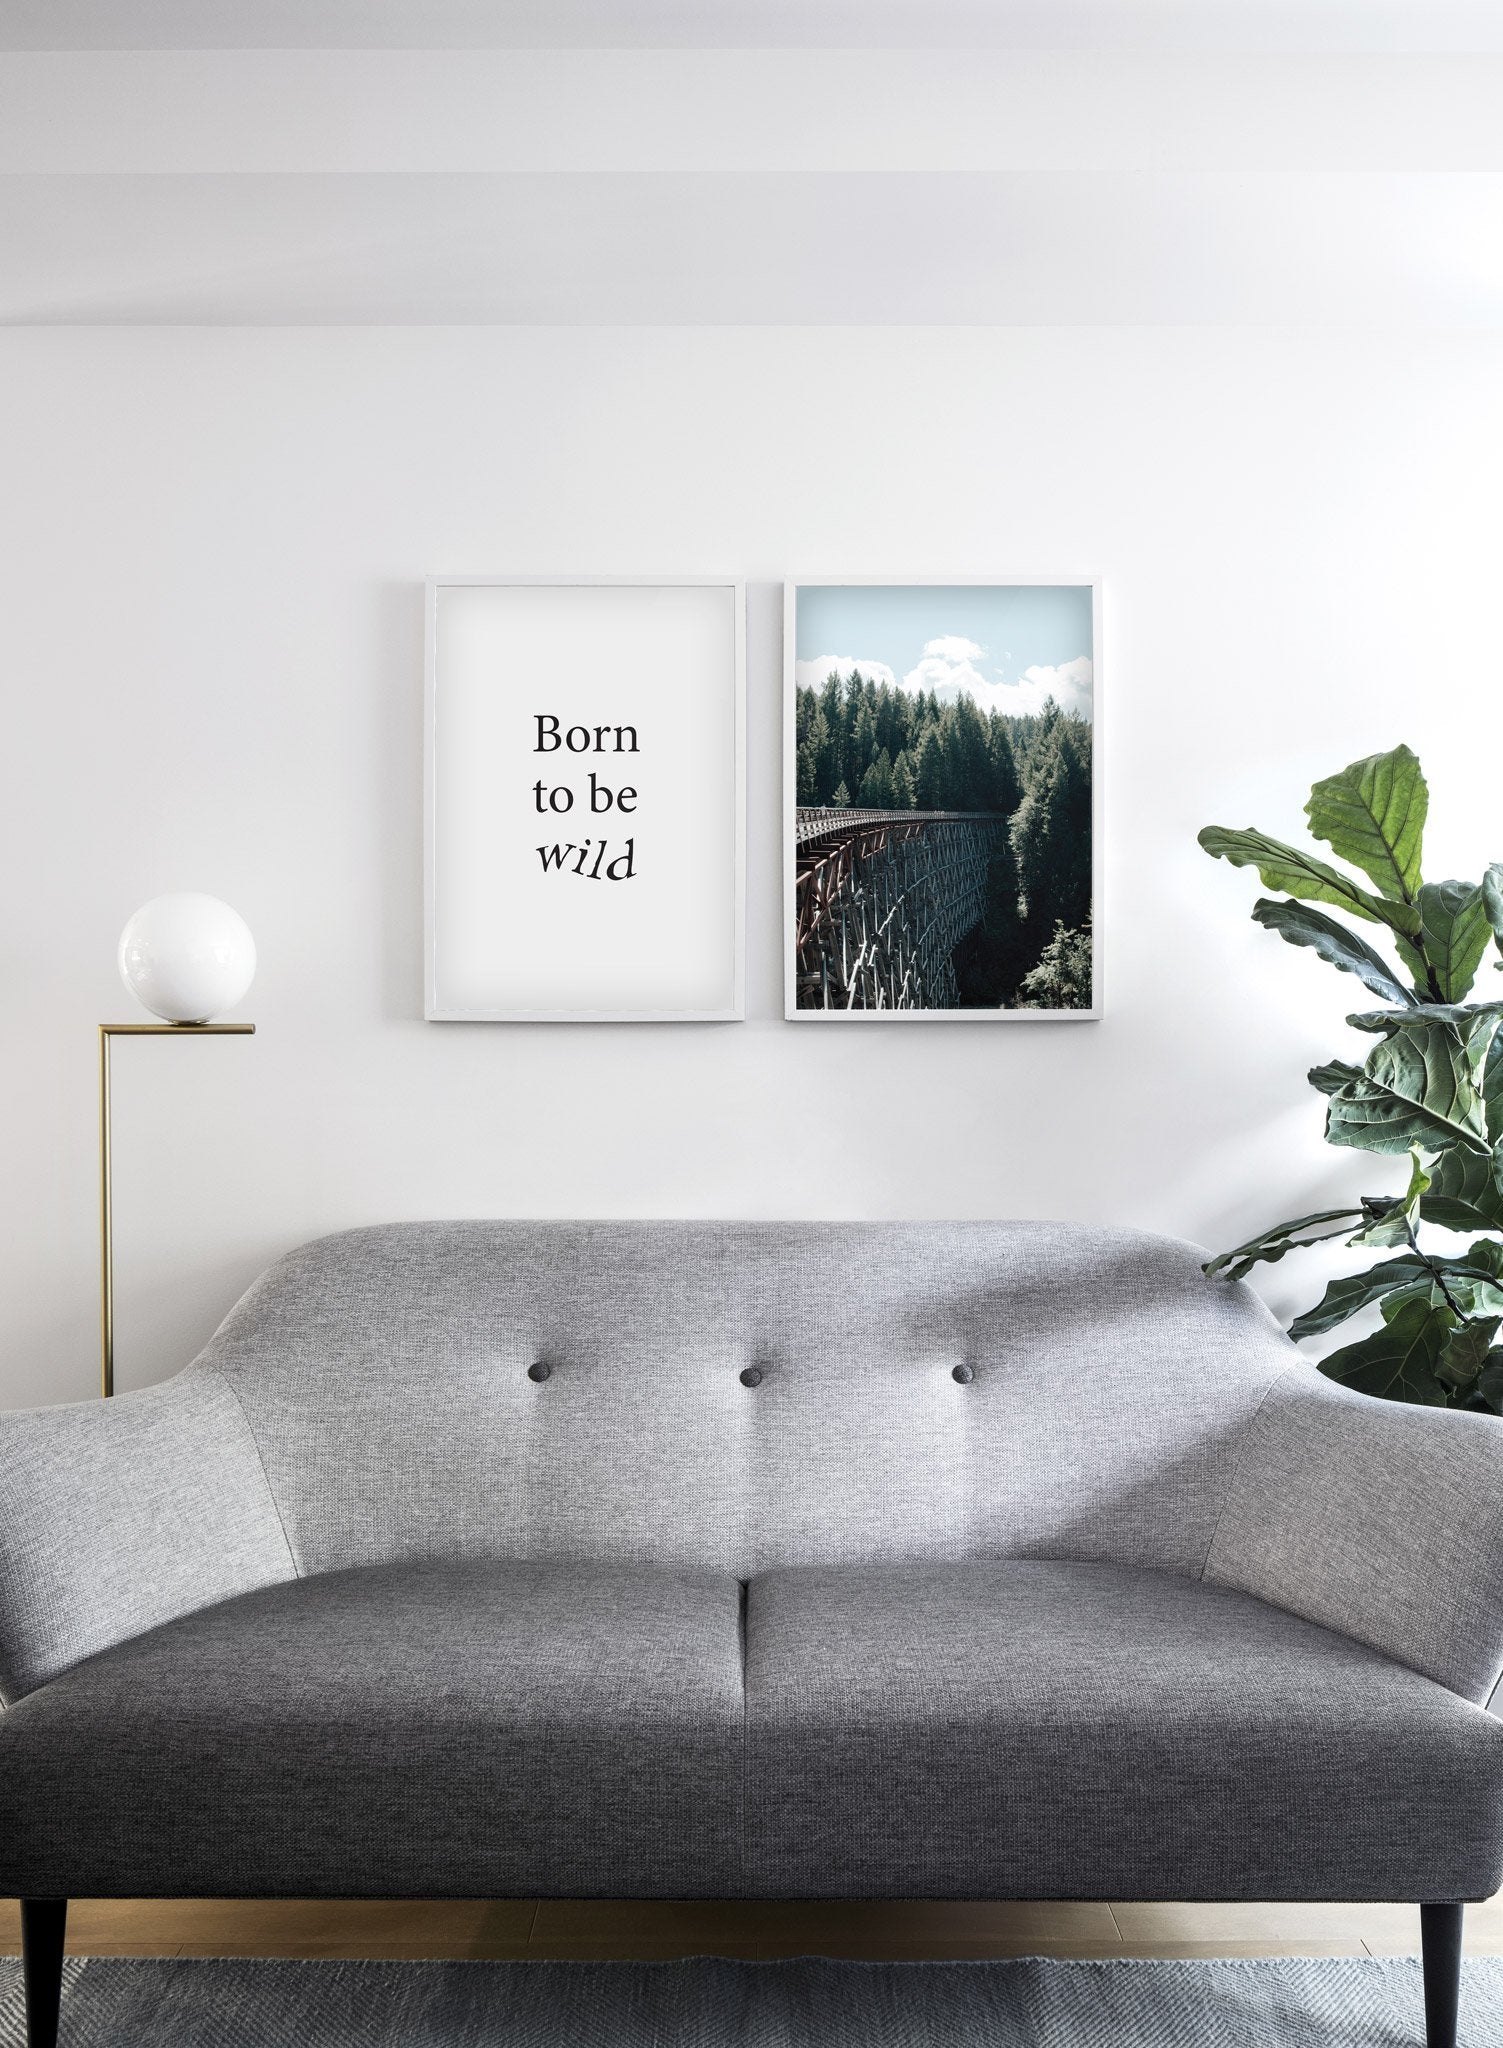 Ten Feet Tall modern minimalist nature photography poster by Opposite Wall - Living room